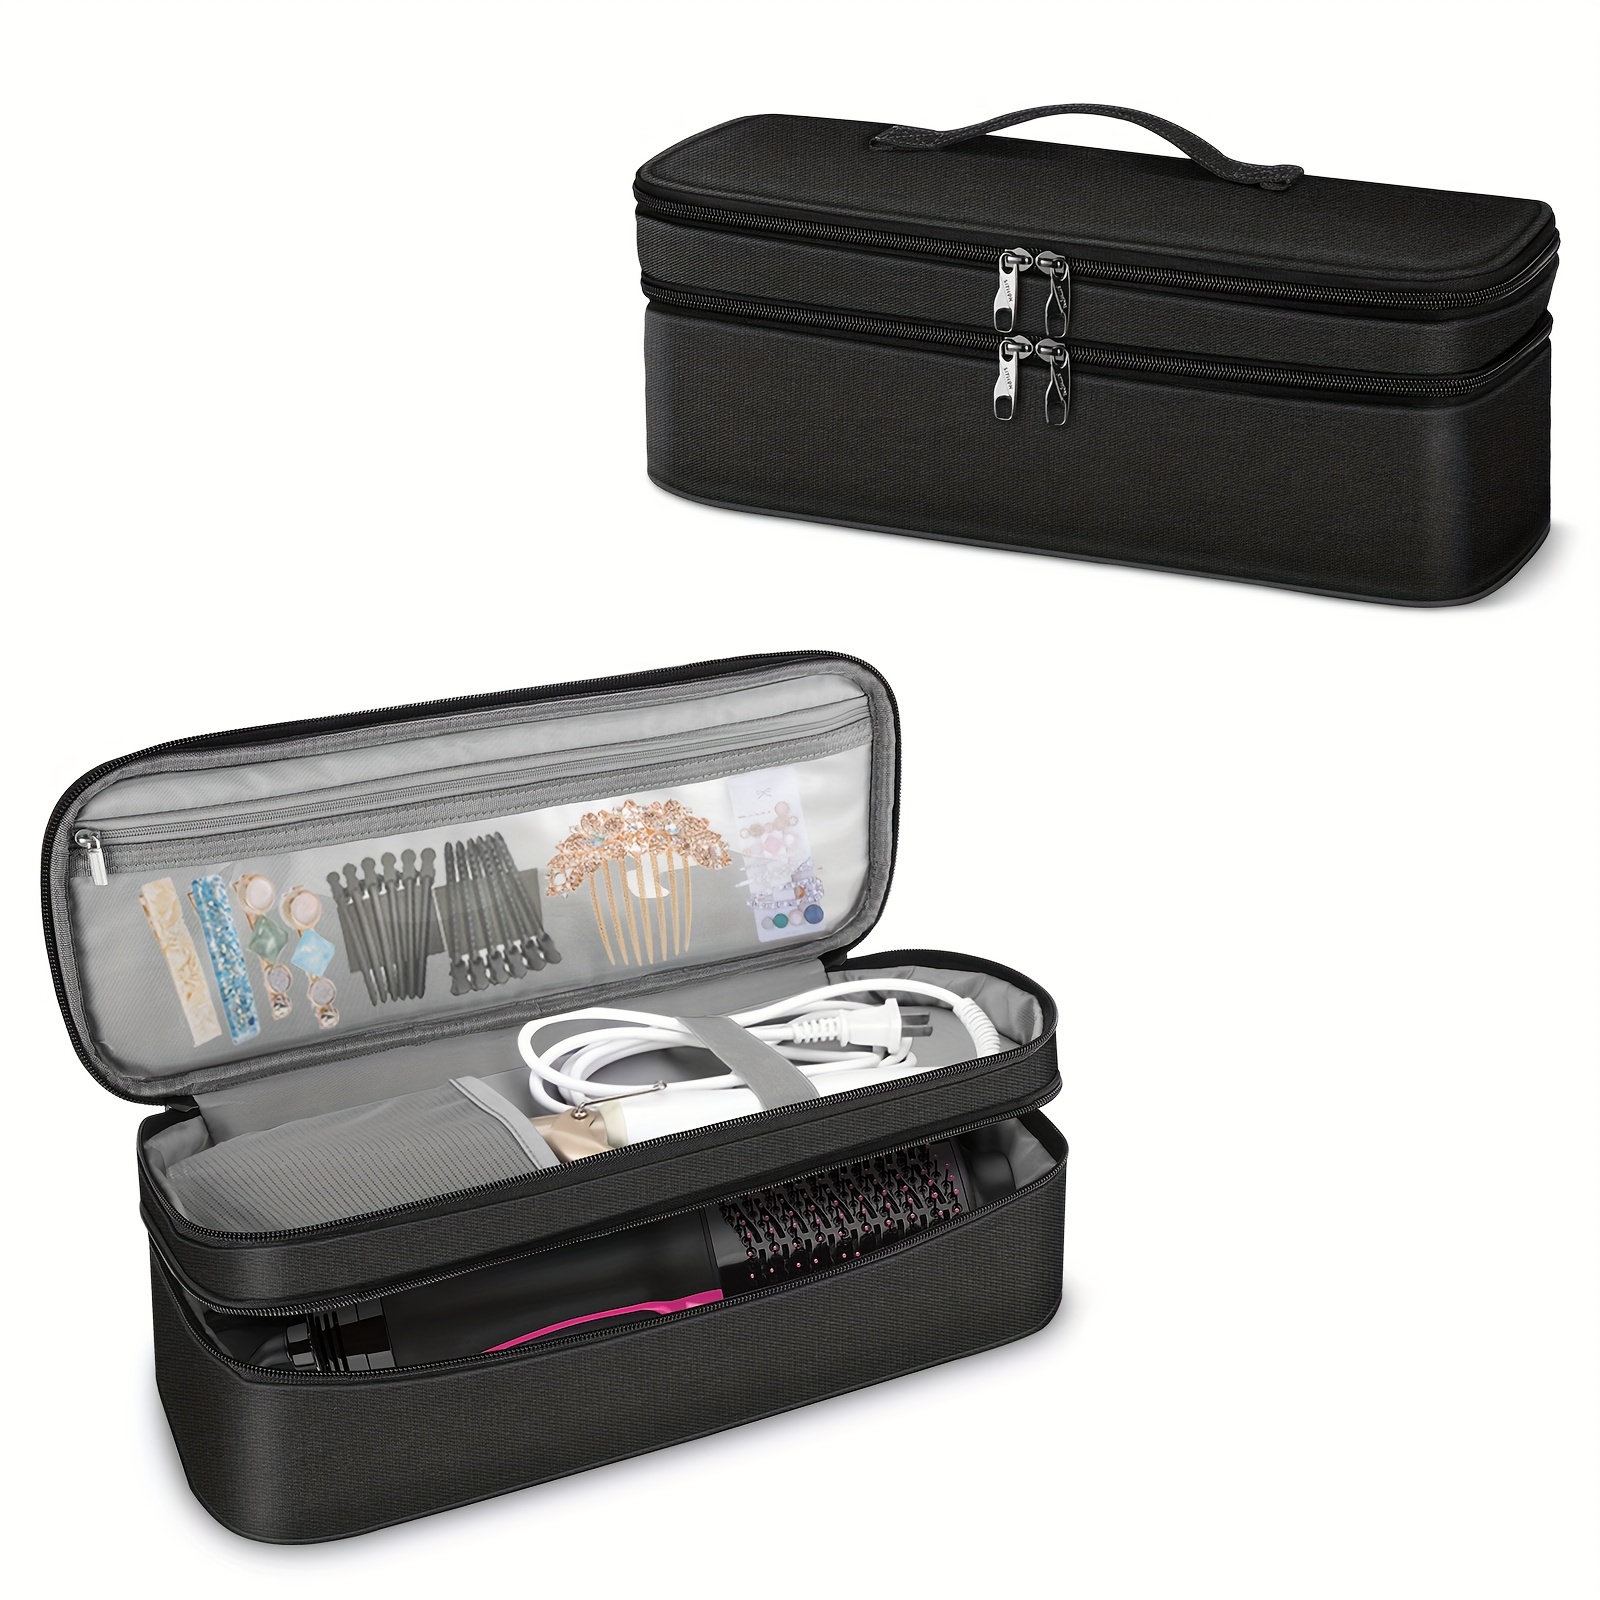 

Shark Case, Carrying Case Compatible With Shark/ Hair Dryer, Portable Double-layer Travel Bag For Styler/ Attachment